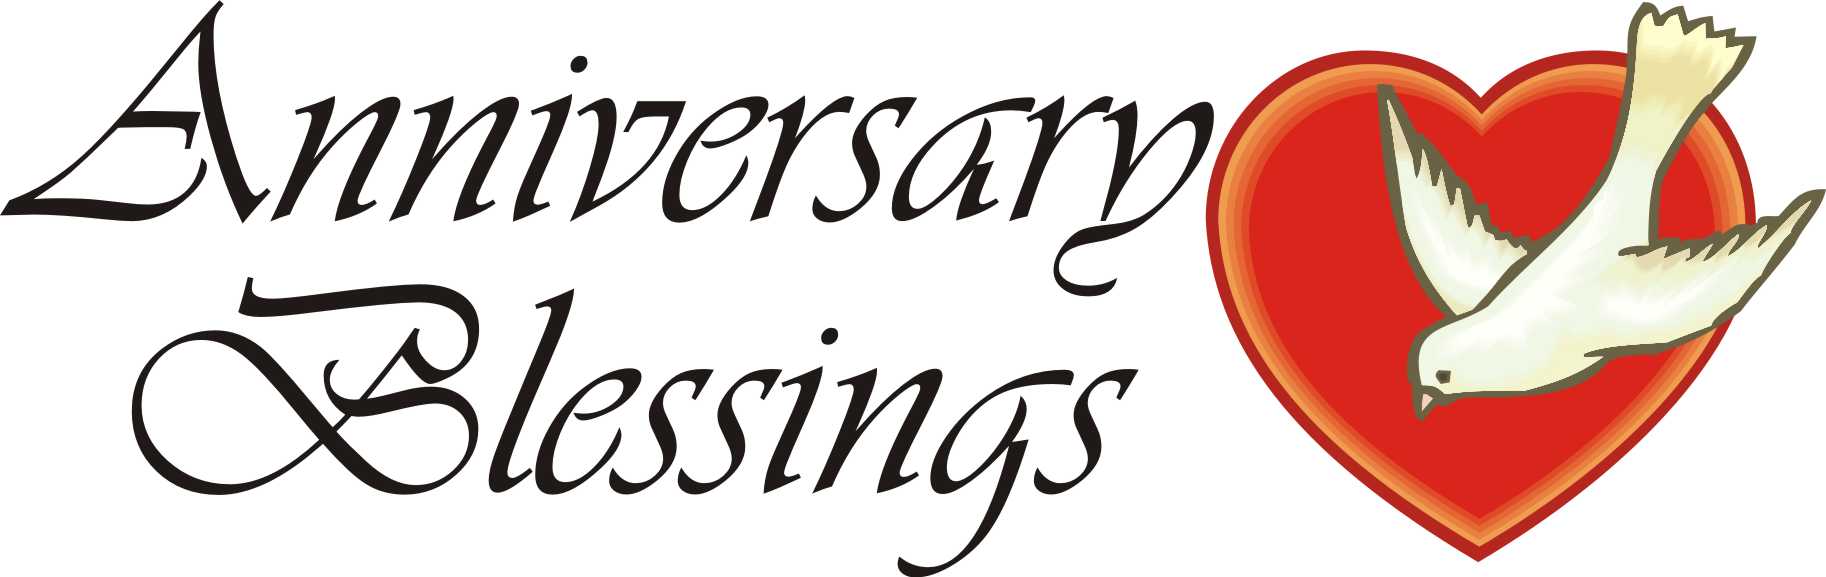 Anniversary Blessings - Kerr Resources